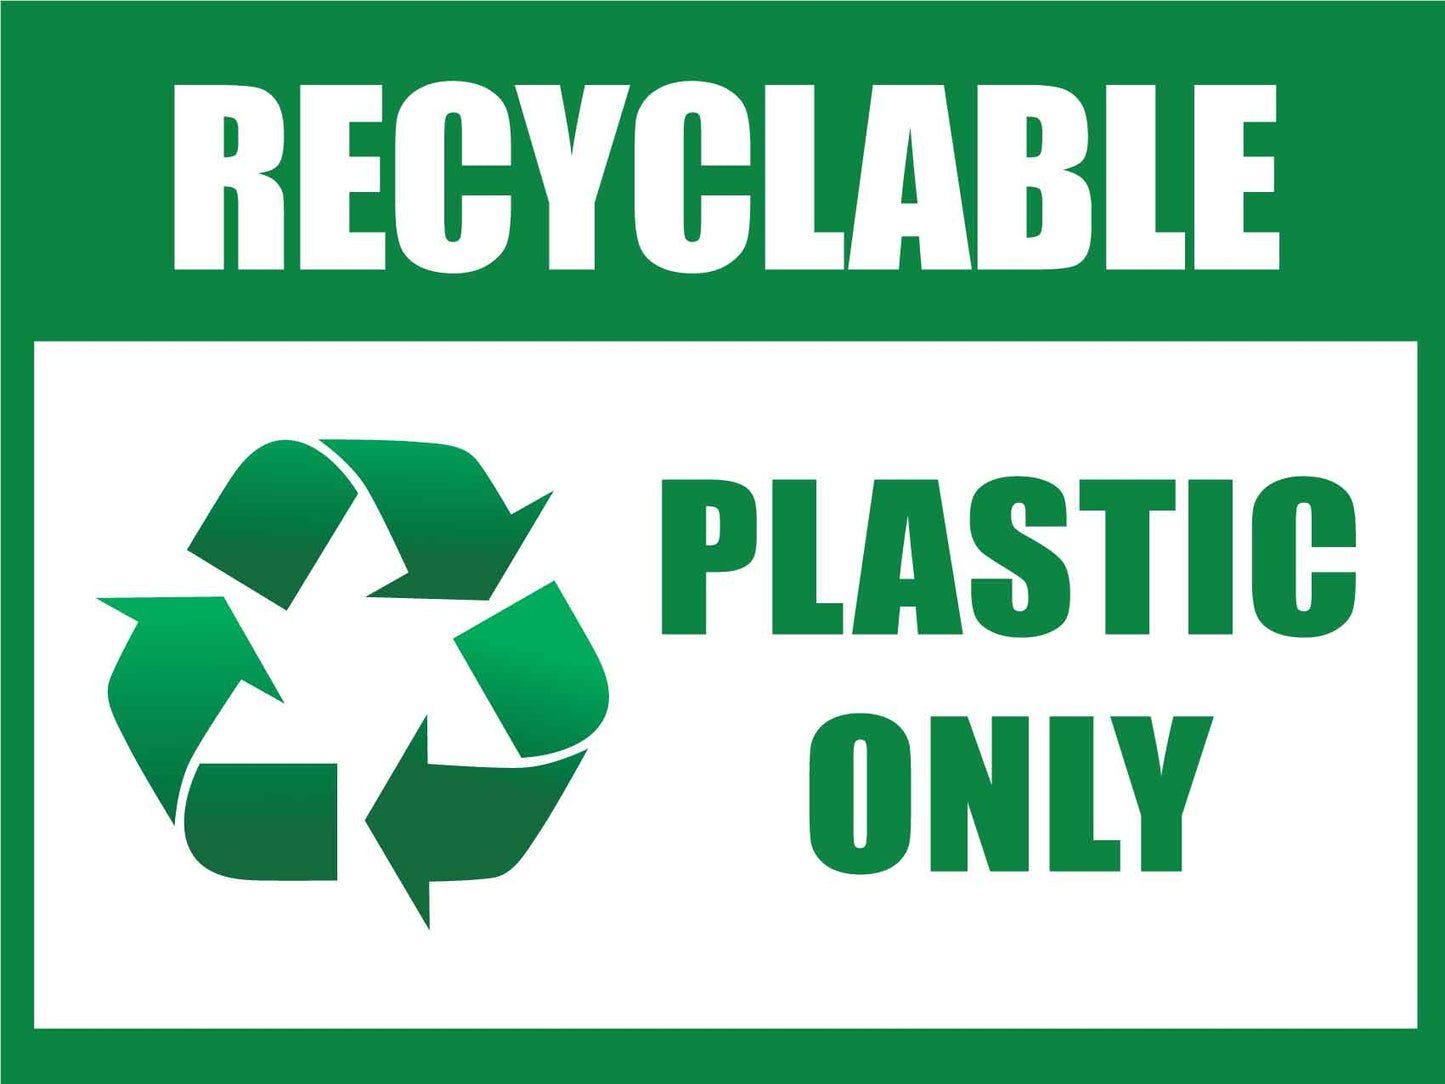 Recyclable Plastic Only Sign